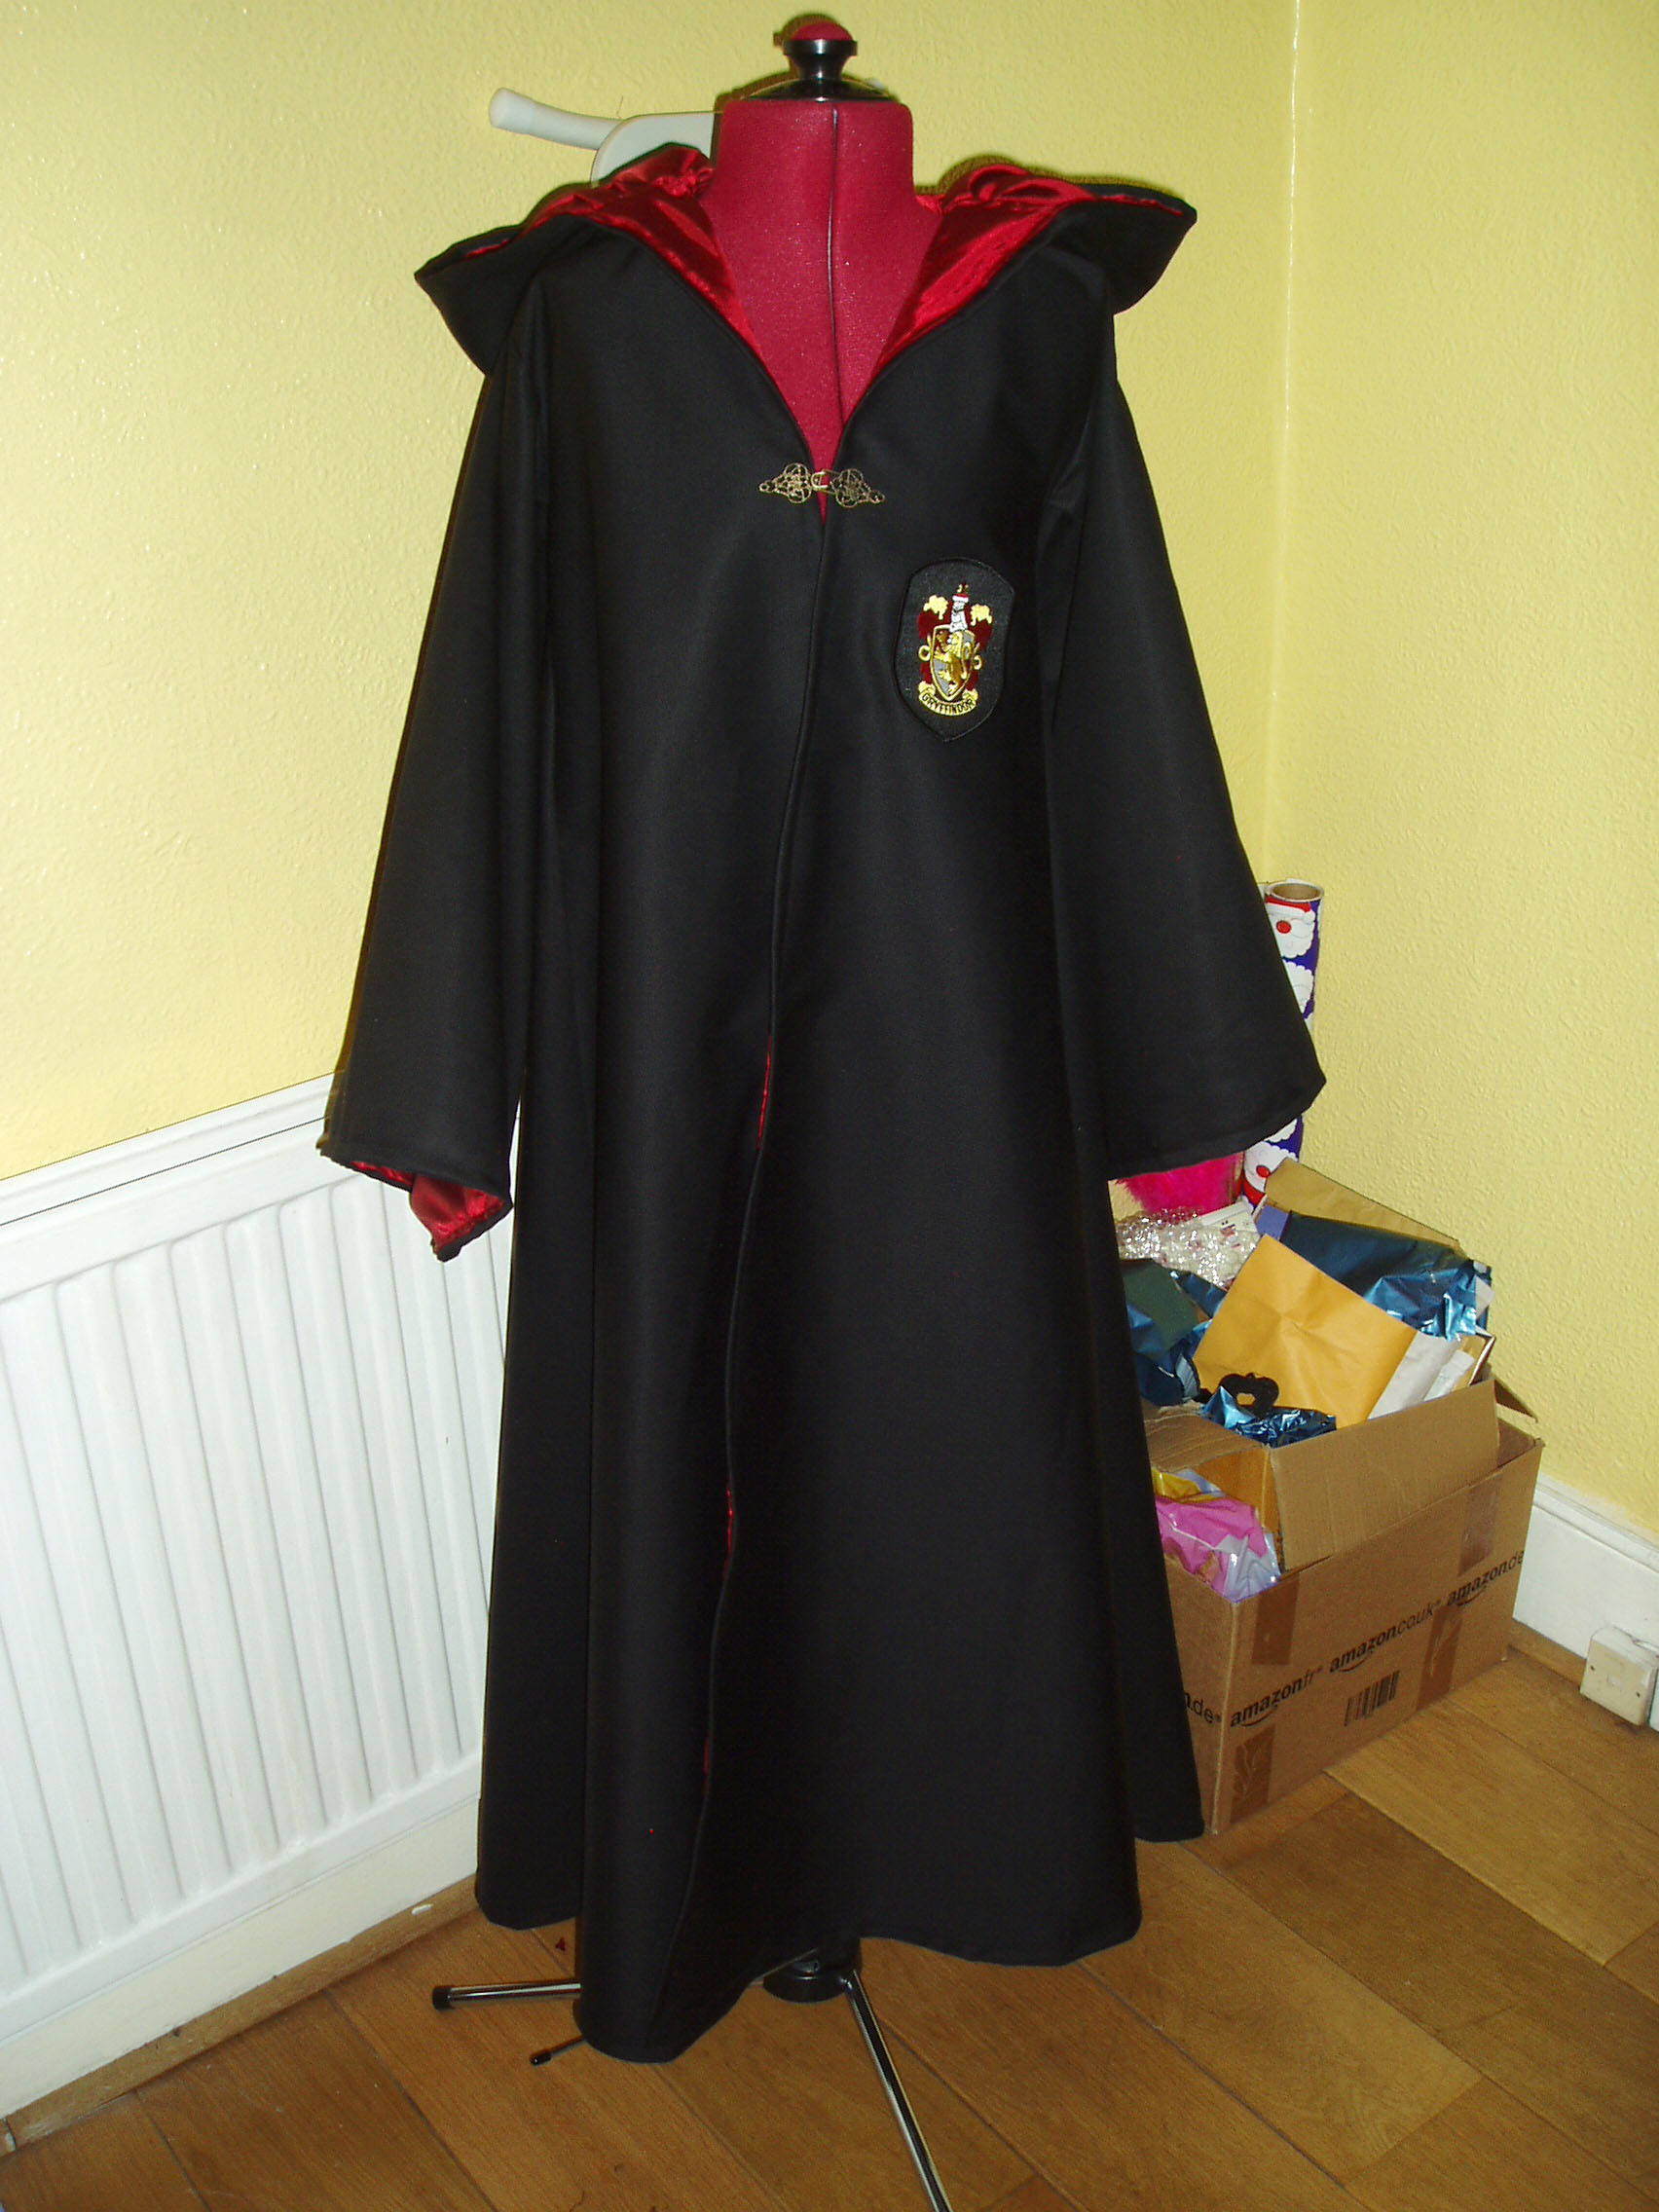 cloak hermione potter harry costumes pattern costume cloaks sewing cape halloween projects burdastyle easy fasion holiday